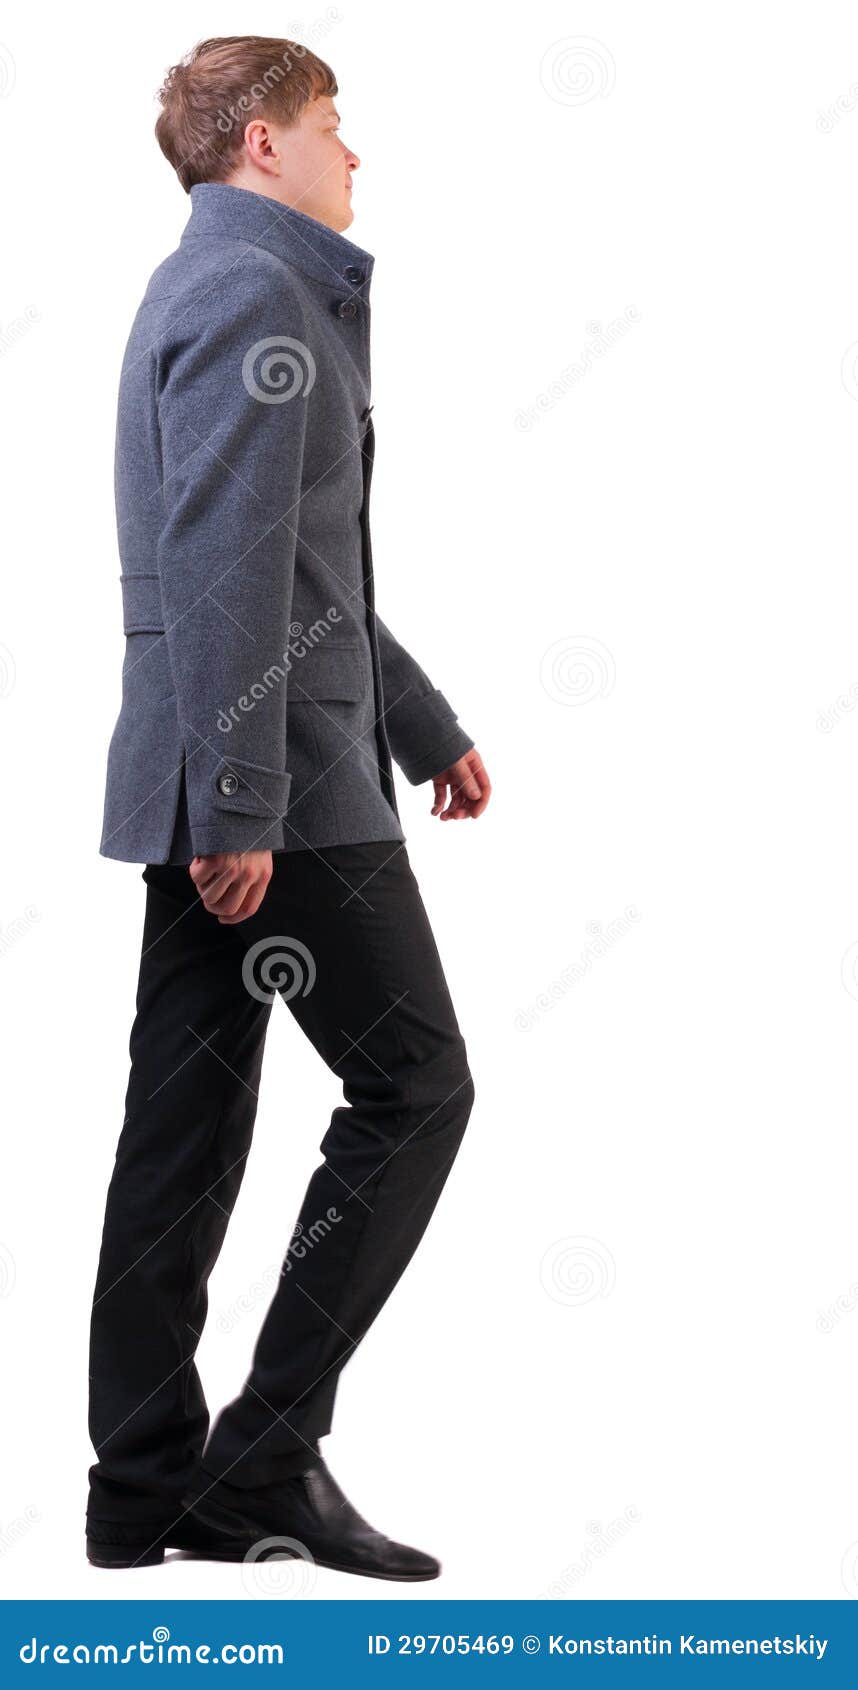 Back View of Walking Business Man Stock Image - Image of brown, rear ...